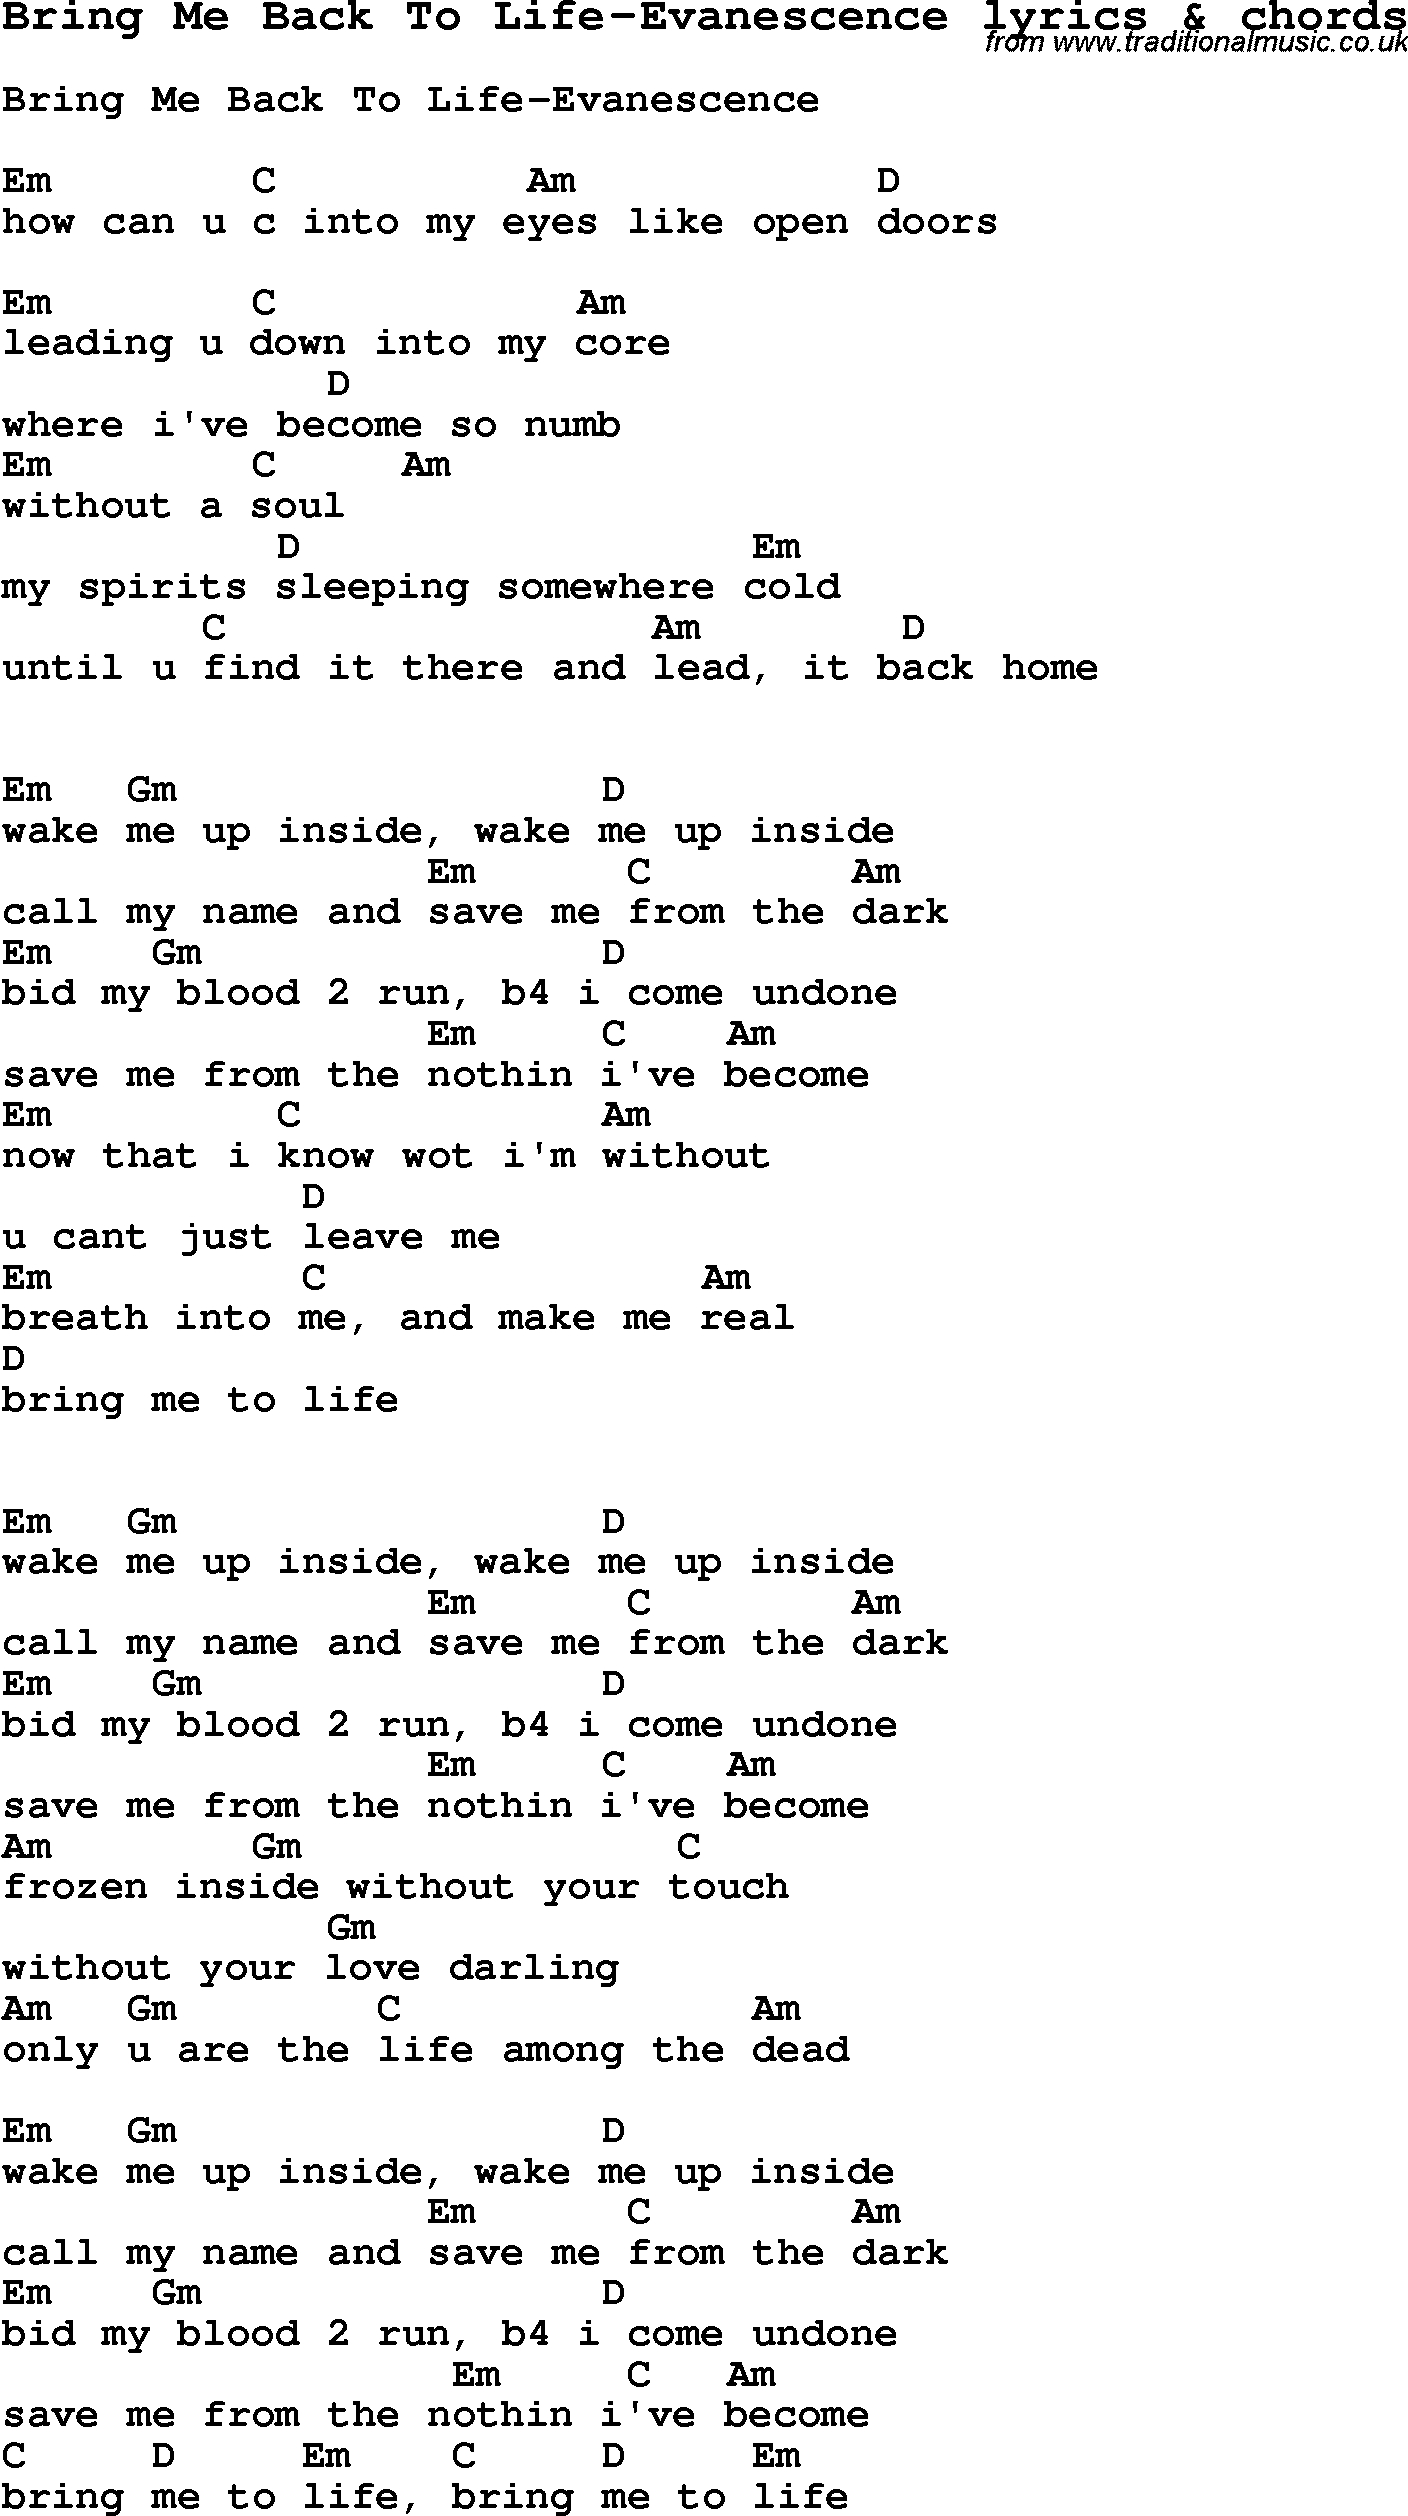 How To Save A Life Chords Love Song Lyrics Forbring Me Back To Life Evanescence With Chords